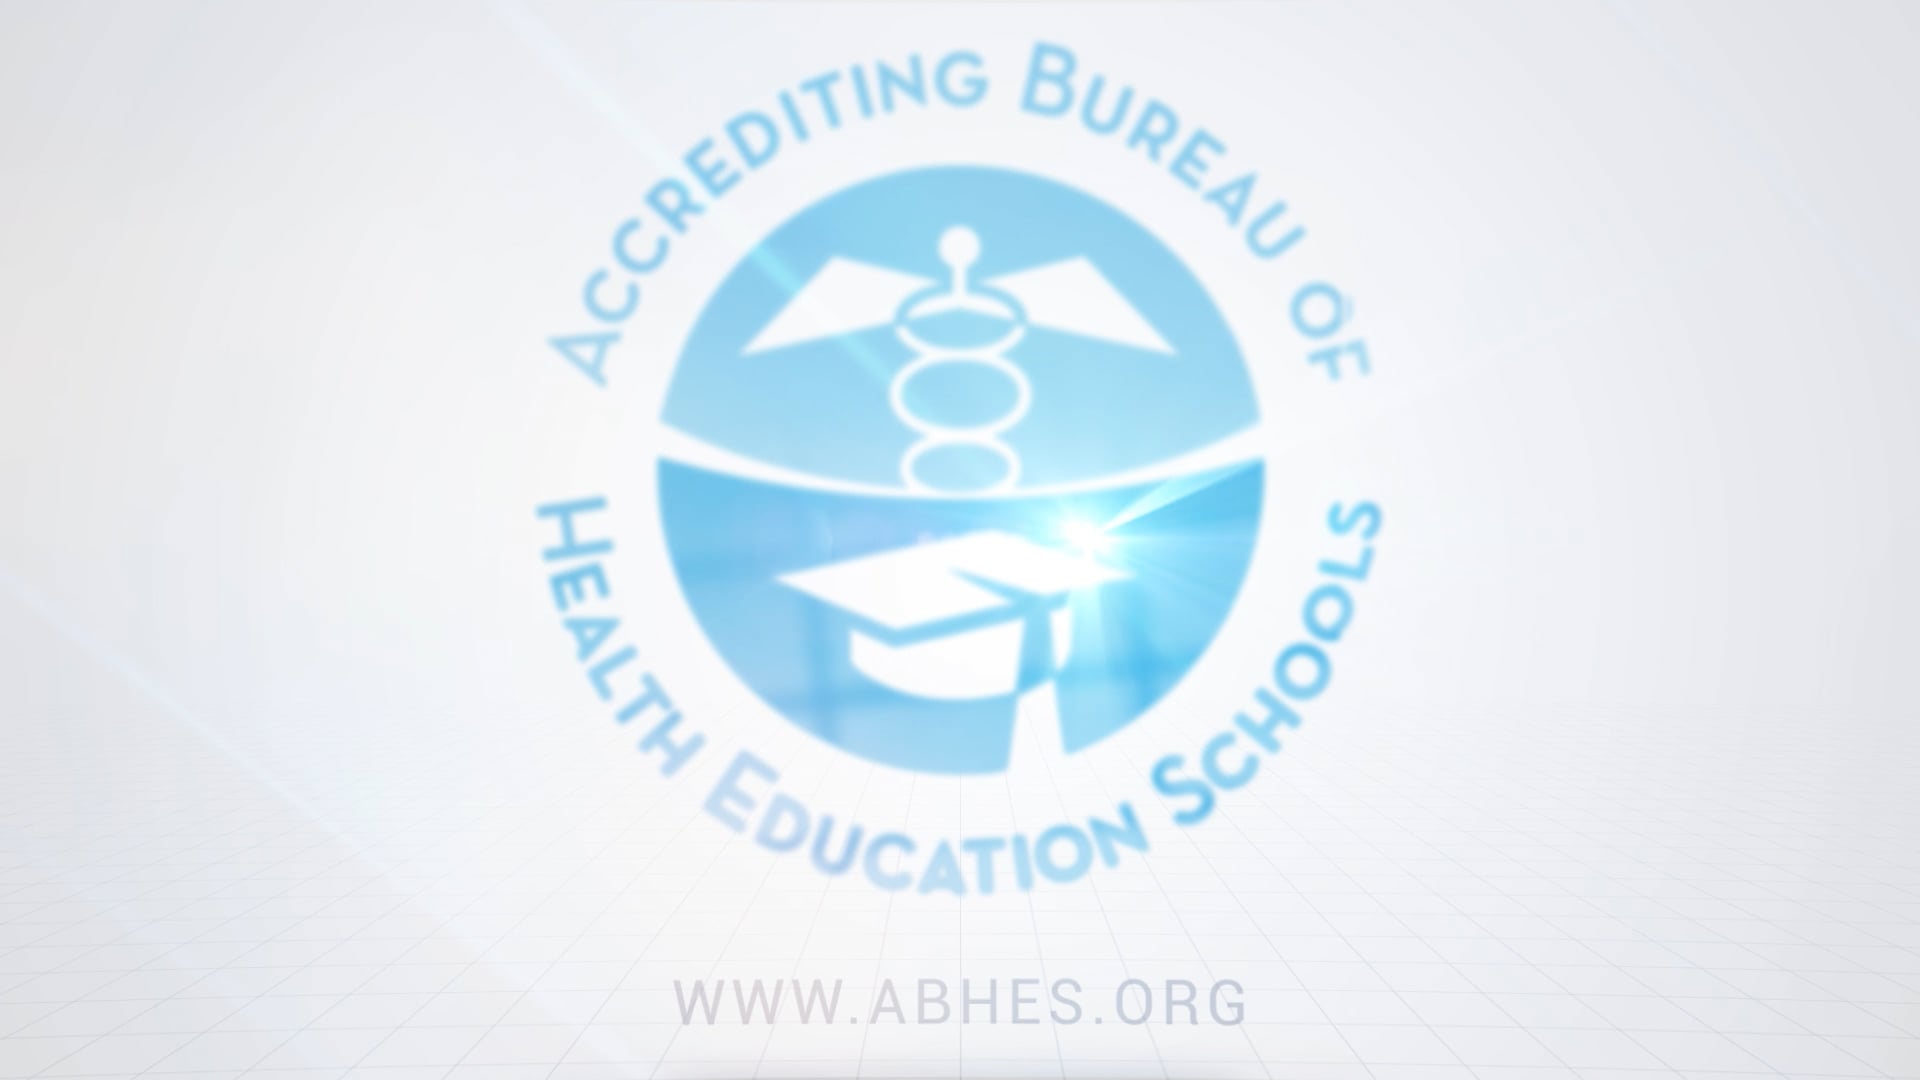 ABHES Conference Highlight 2023 on Vimeo